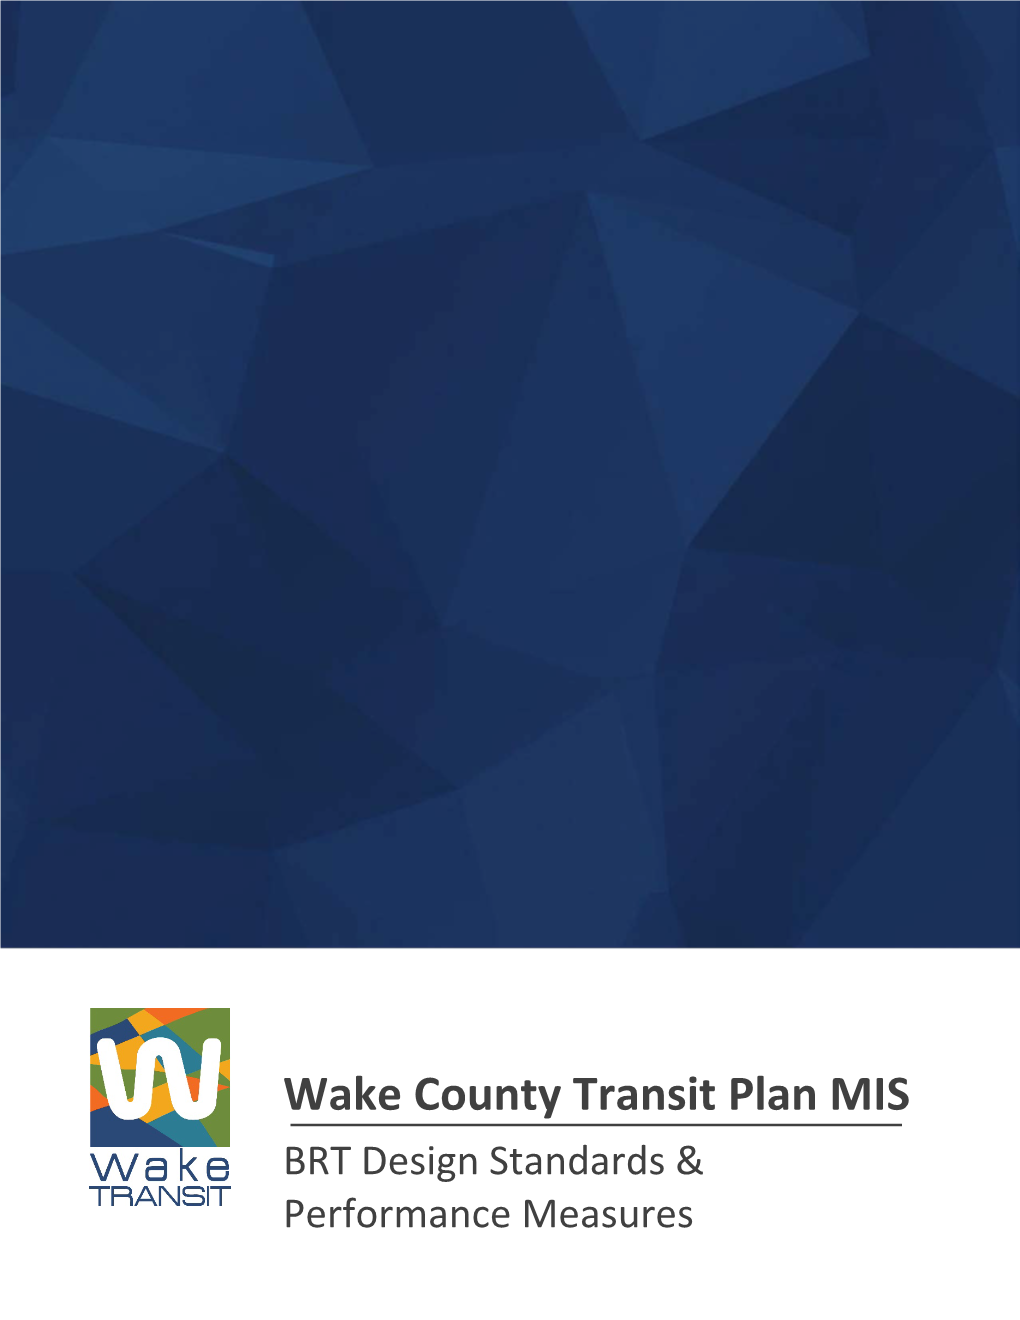 BRT Design Standards and Performance Measures FINAL Wake County Transit Plan Major Investment Study